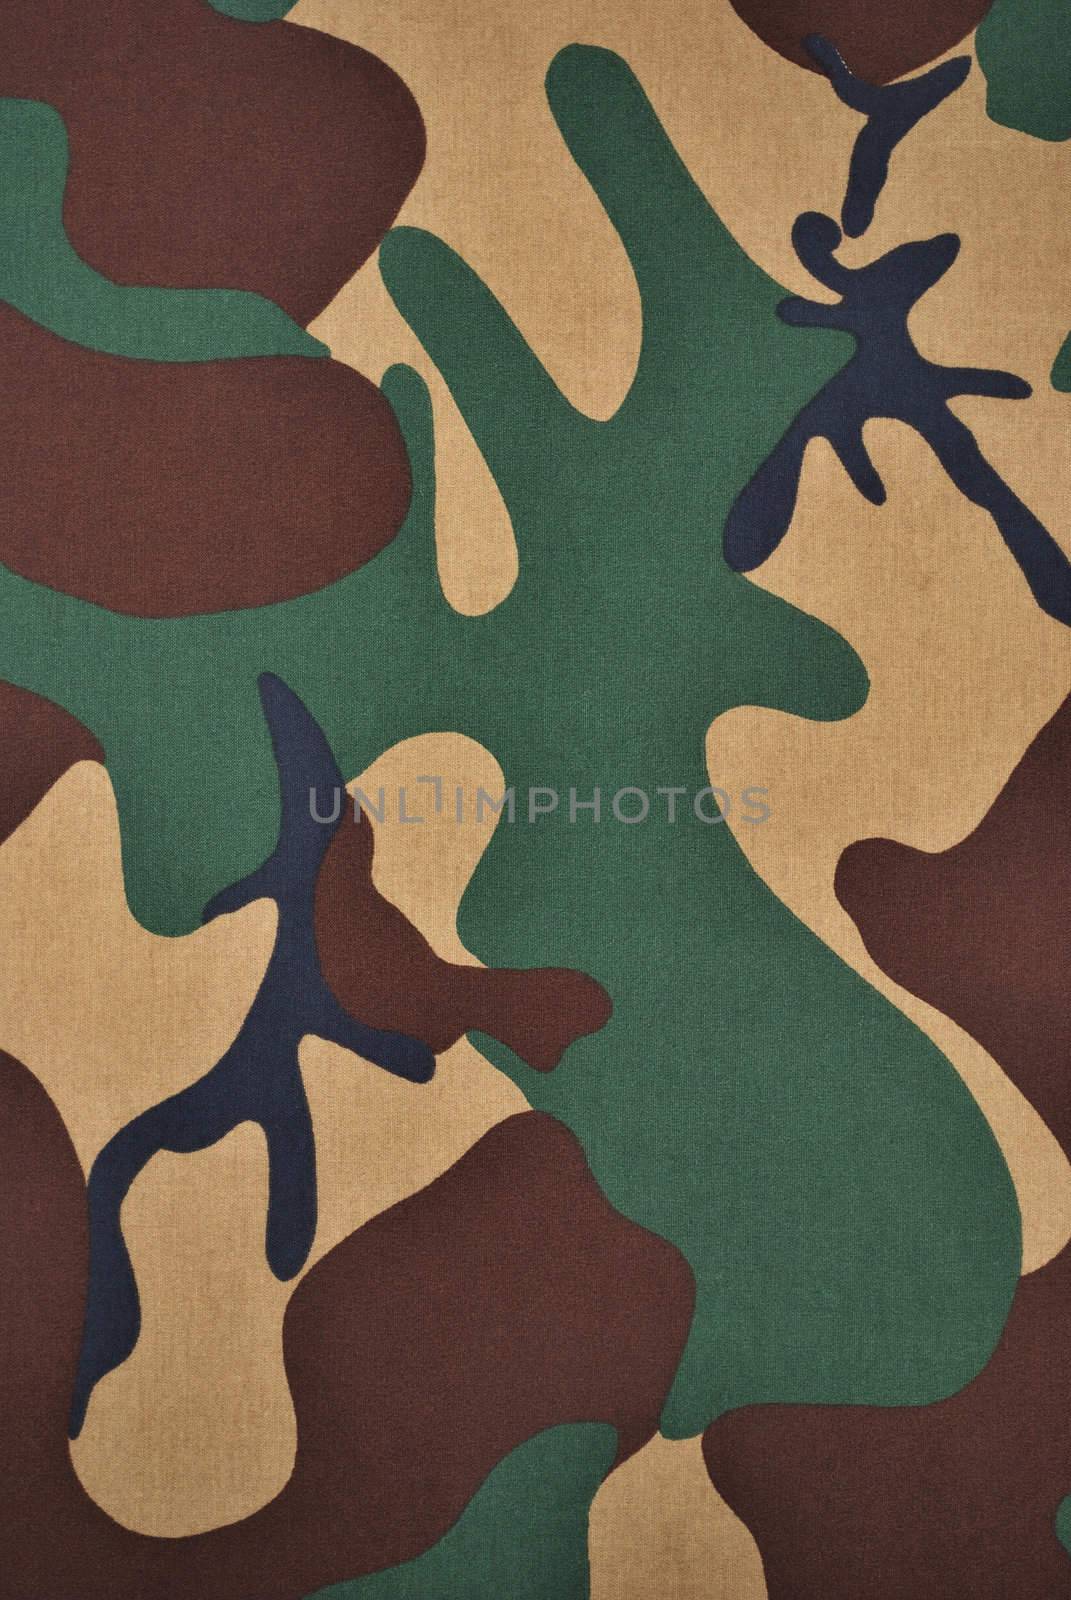 camouflage fabric by vetkit